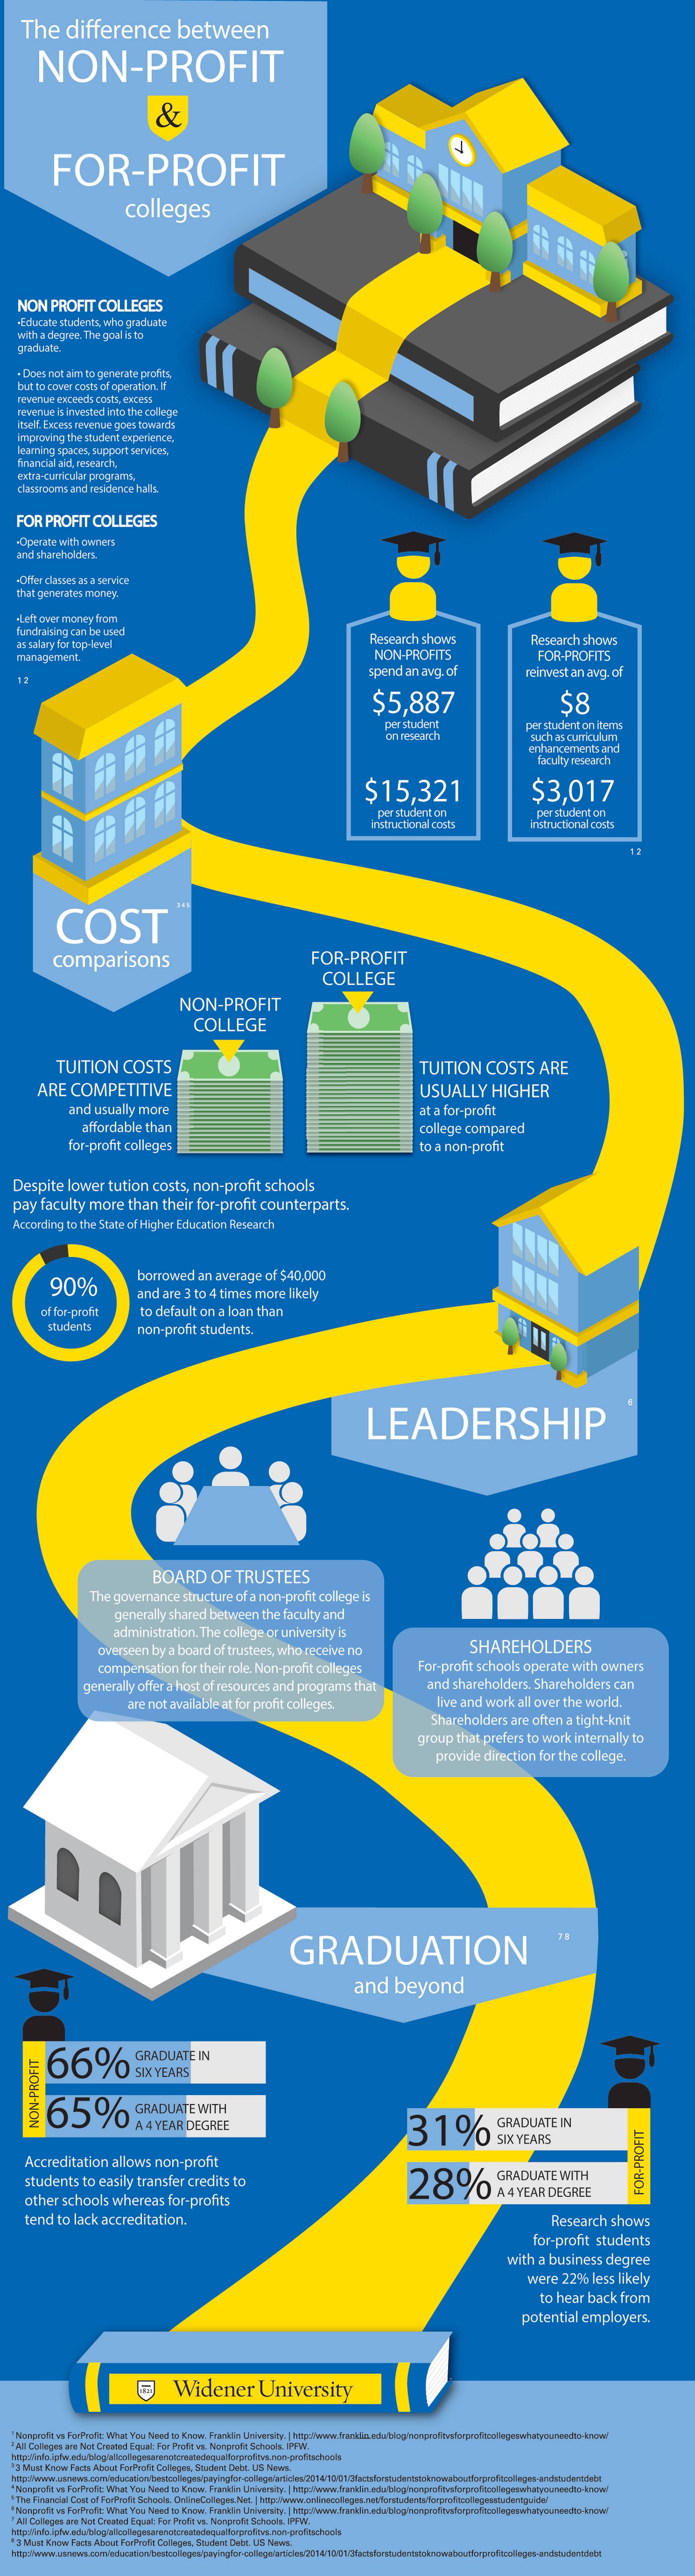 Infographic on the difference between non-profit and for-profit colleges